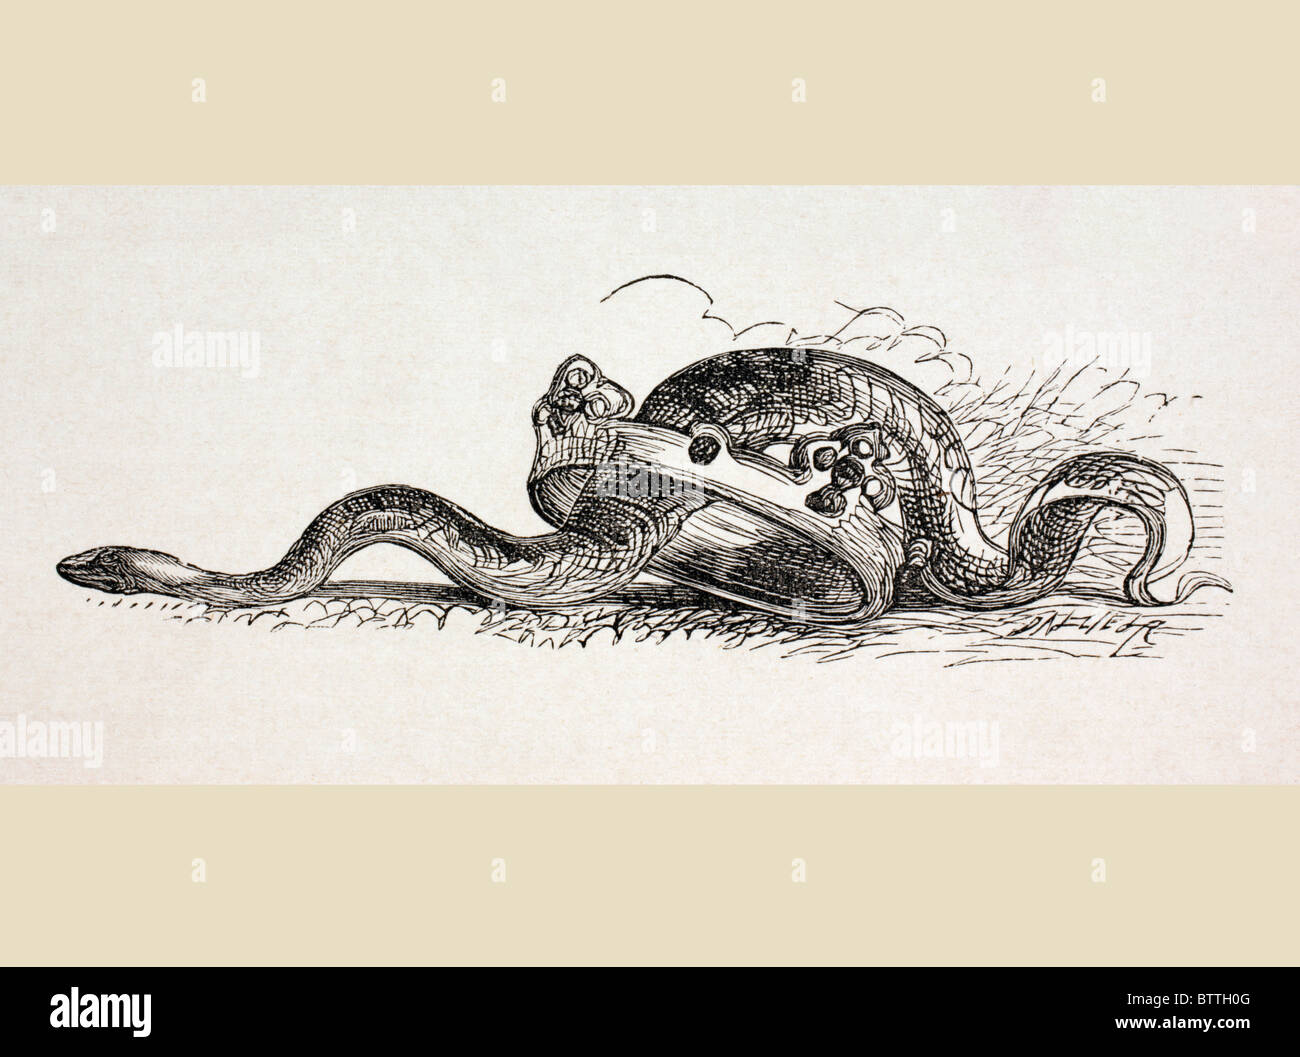 A snake slithers through a royal crown. A symbolic illustration at the end of the Act II of Hamlet by William Shakespeare Stock Photo